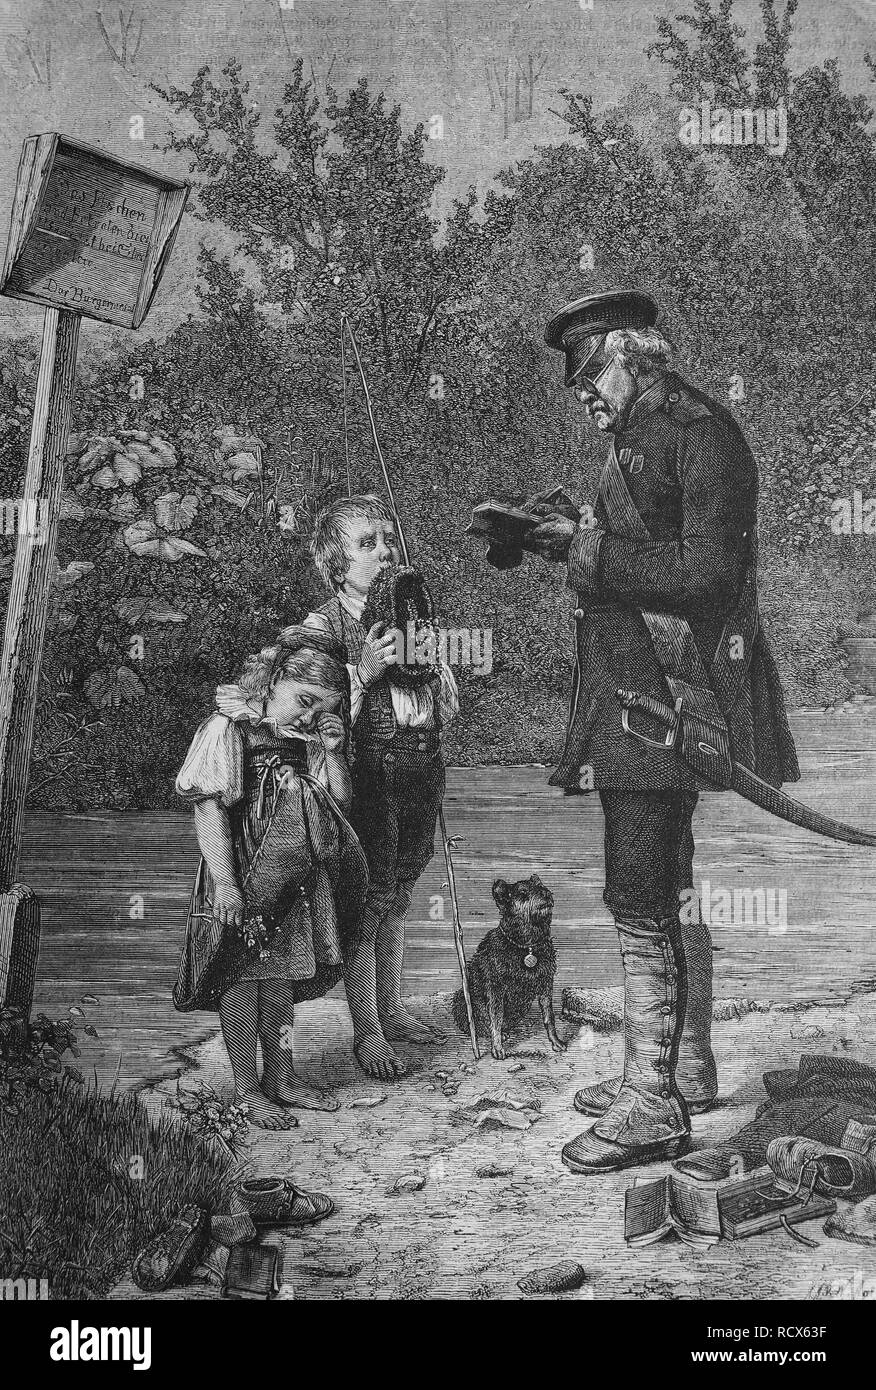 Policeman caught children fishing at a no-fishing zone, wood engraving, 1880 Stock Photo